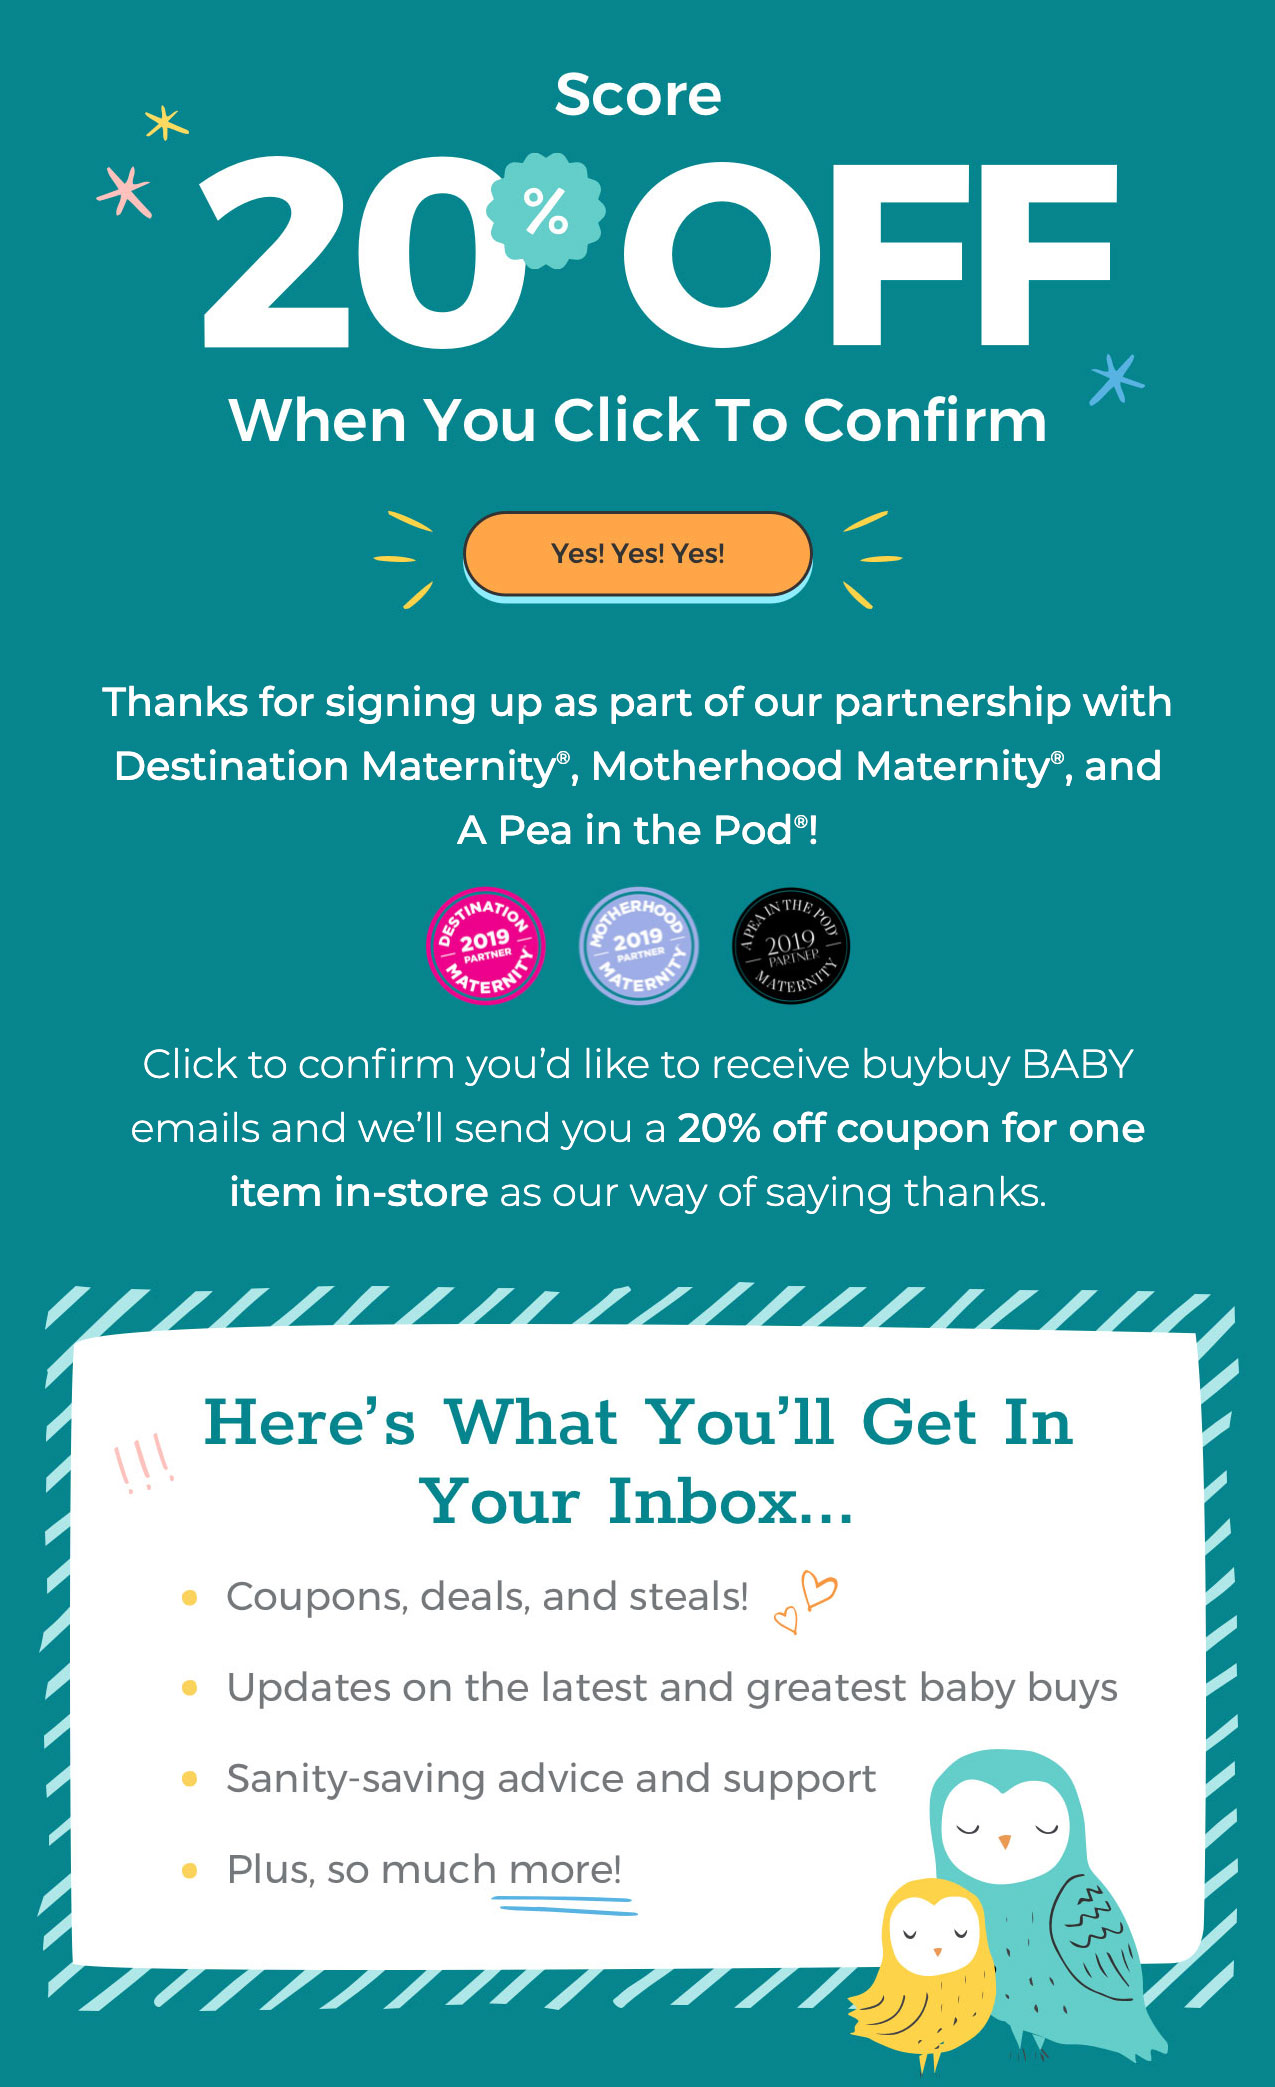 Score 20% Off When You Click To Confirm. Yes! Yes! Yes! Thanks for signing up as part of our partnership with Destination Maternity®, Motherhood Maternity®, and A Pea in the Pod®! Click to confirm you''d like to receive buybuy BABY emails and we''ll send you a 20% off coupon for one item in-store as our way of saying thanks. Here?s What You?ll Get In Your Inbox... coupons, deals, and steals! updates on the latest and greatest baby buys sanity-saving advice and support plus, so much more!